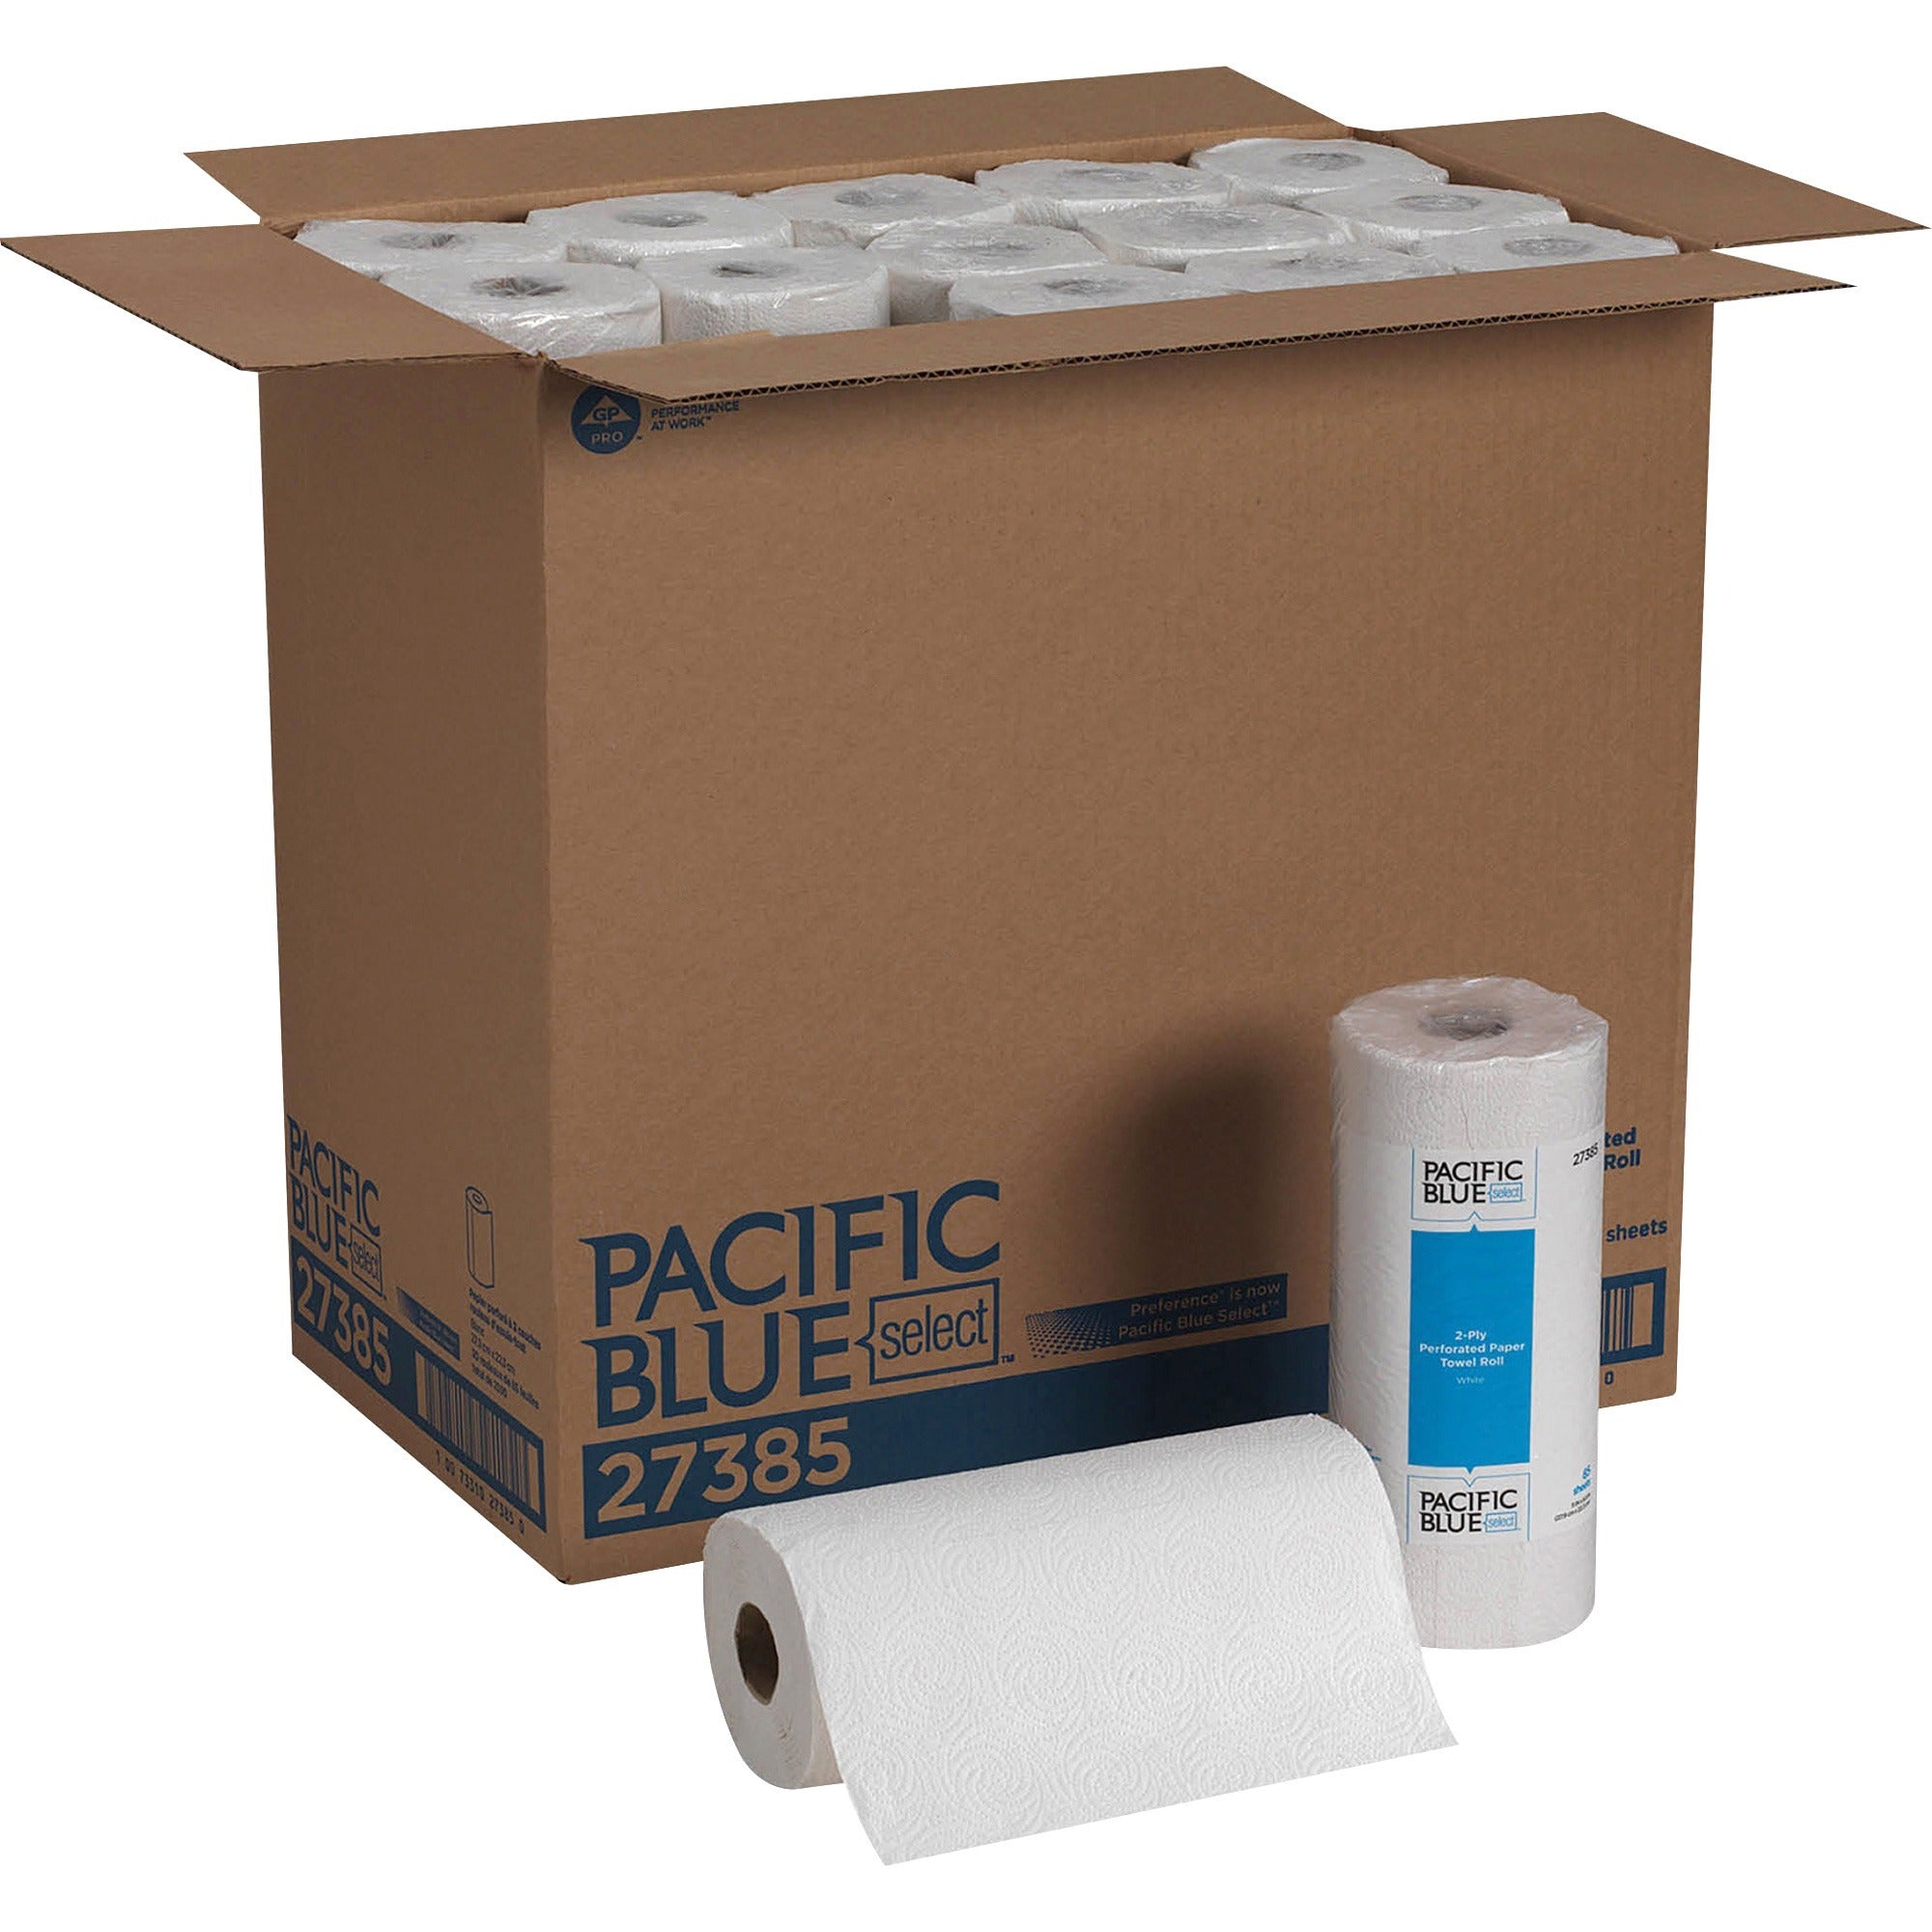 Pacific Blue Select Perforated Paper Towel Roll - 2 Ply - 8.80" x 11" - 85 Sheets/Roll - White - Paper - Perforated - For Healthcare, Food Service - 30 / Carton - 